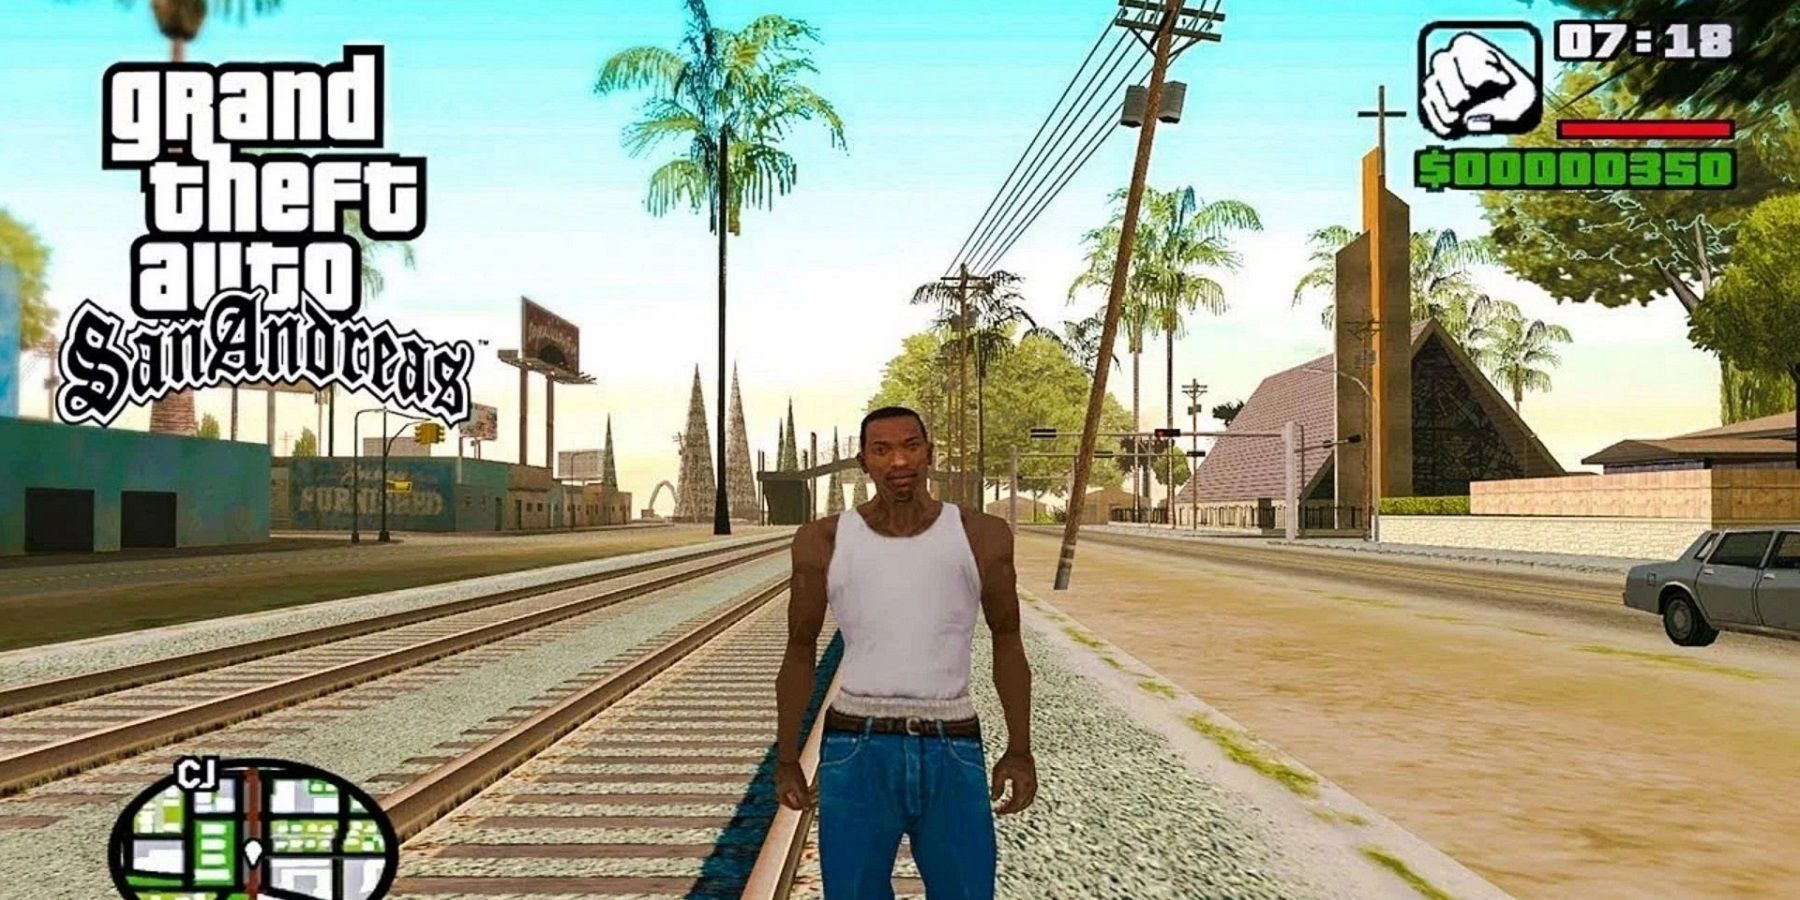 Screenshot from Grand Theft Auto: San Andreas, showing CJ standing on the railway tracks.